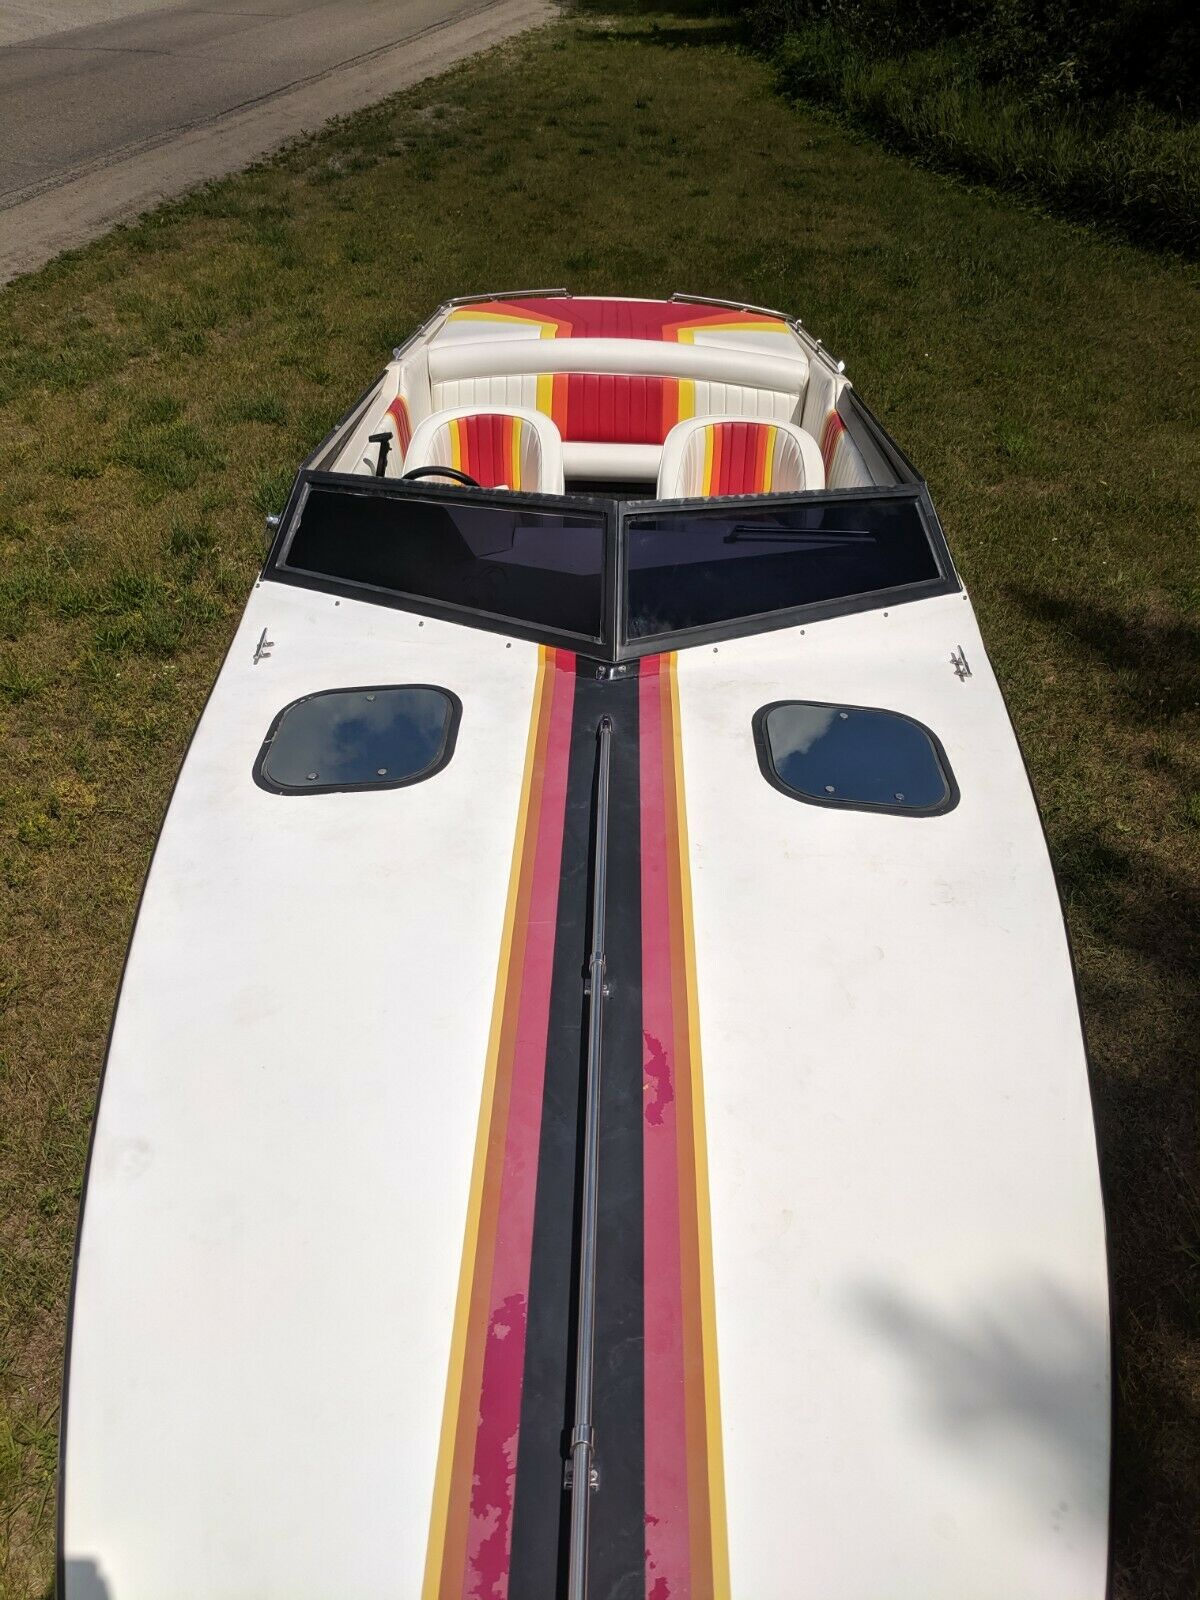 Vector 24 PYTHON 1989 for sale for $9,750 - Boats-from-USA.com